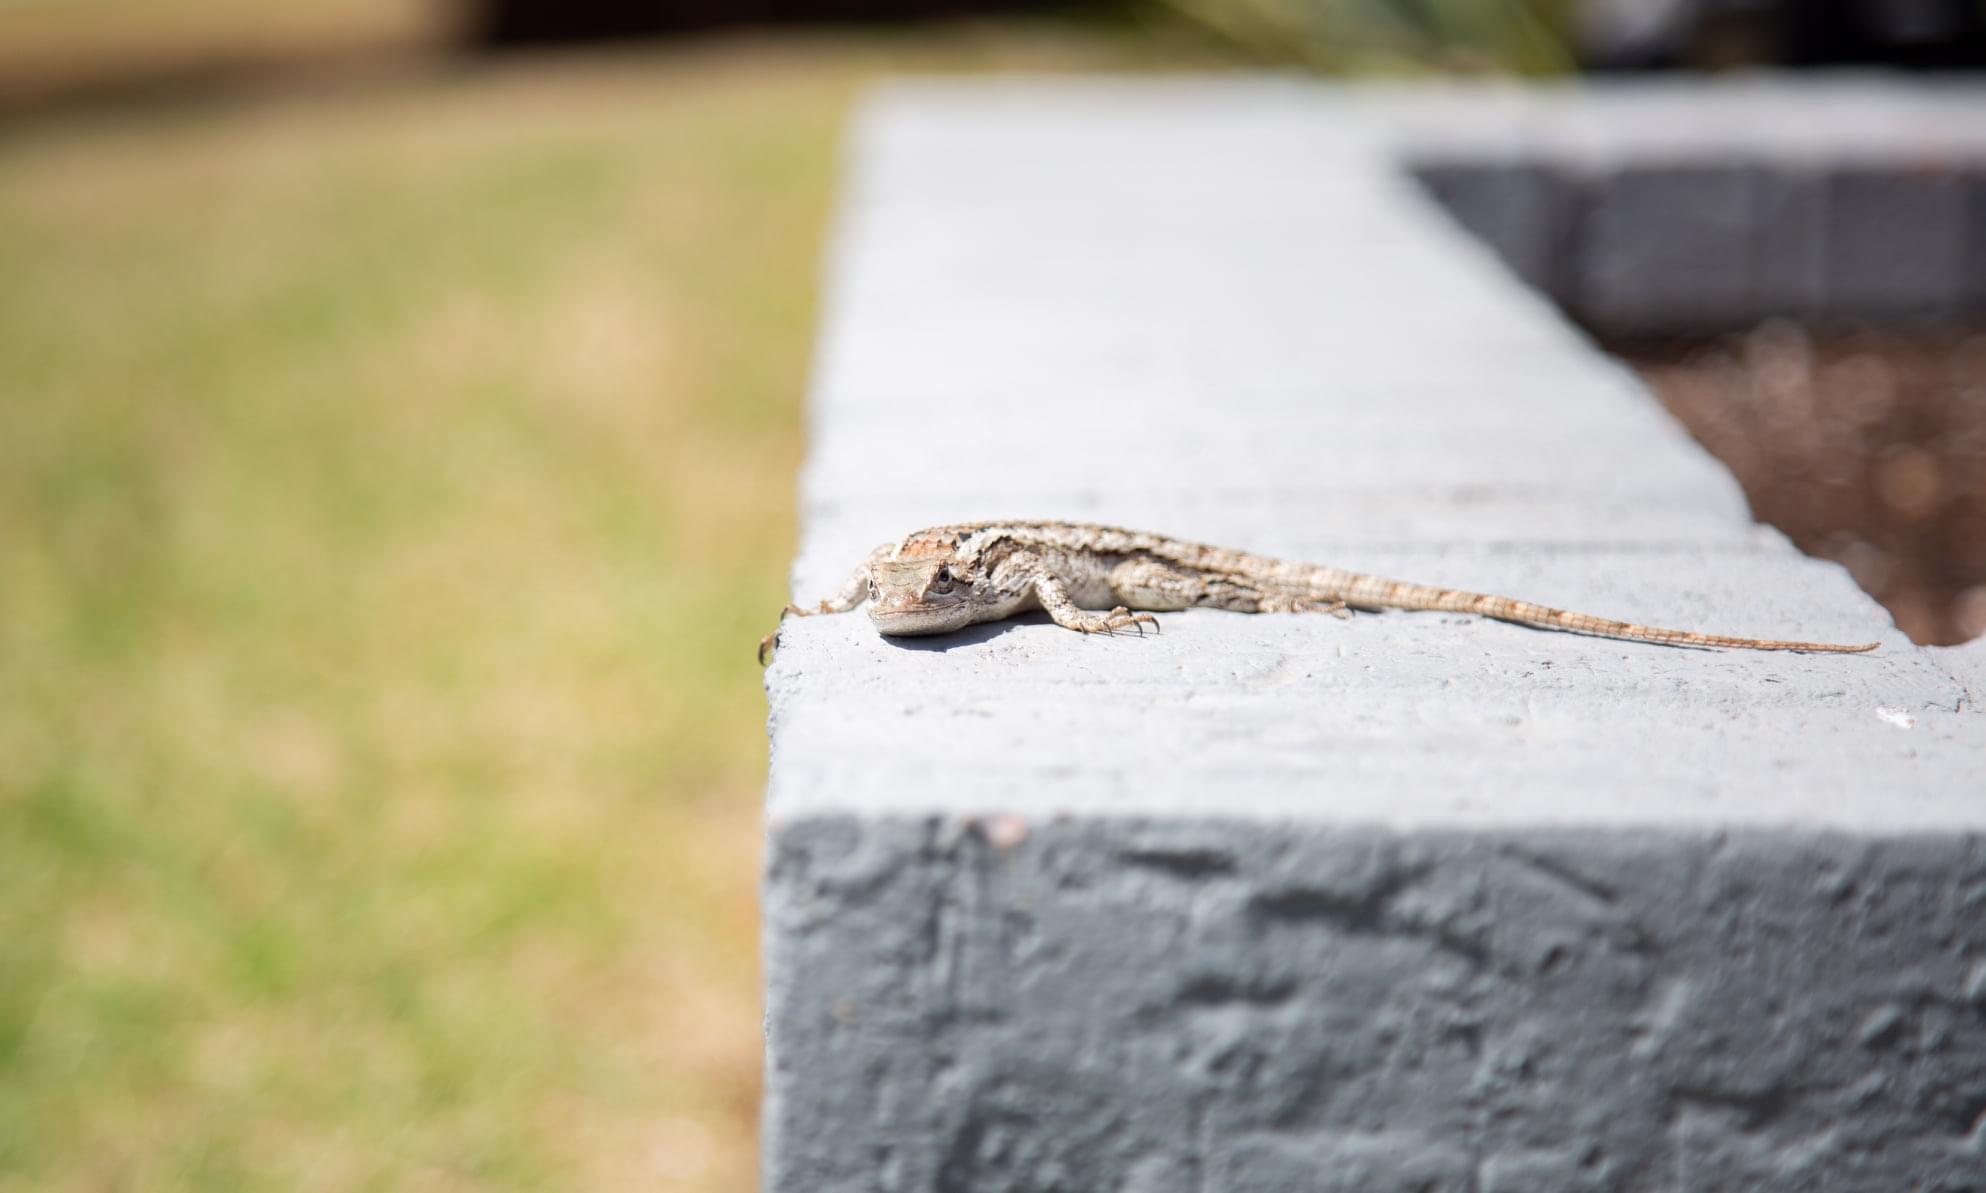 How To Keep Lizards Off Your Porch